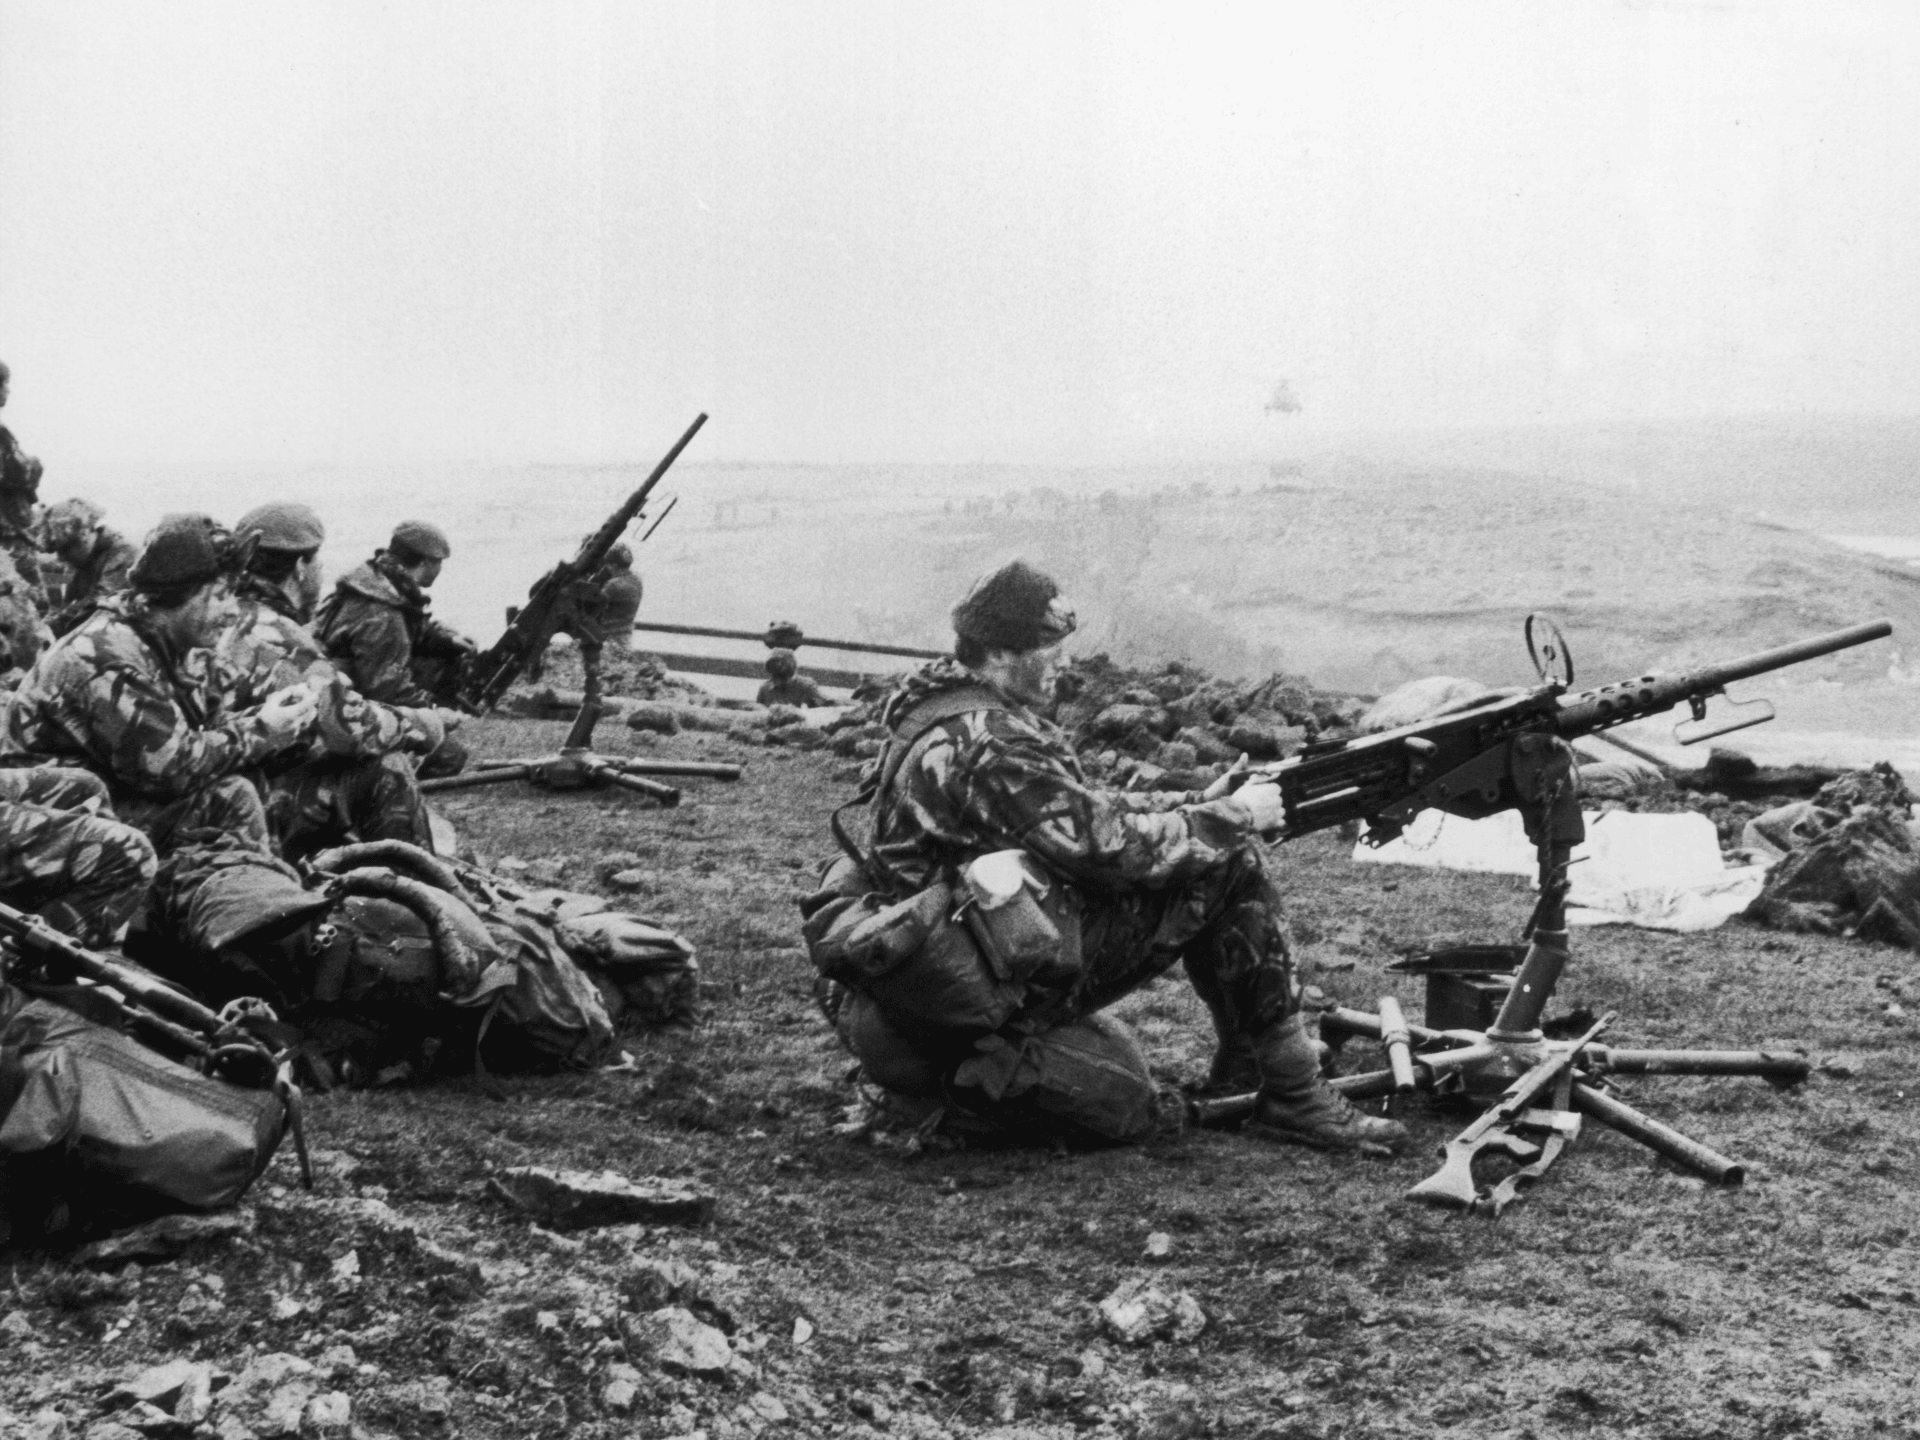 1982: British soldiers in action during the Falklands War. (Photo by Fox Photos/Getty Images)